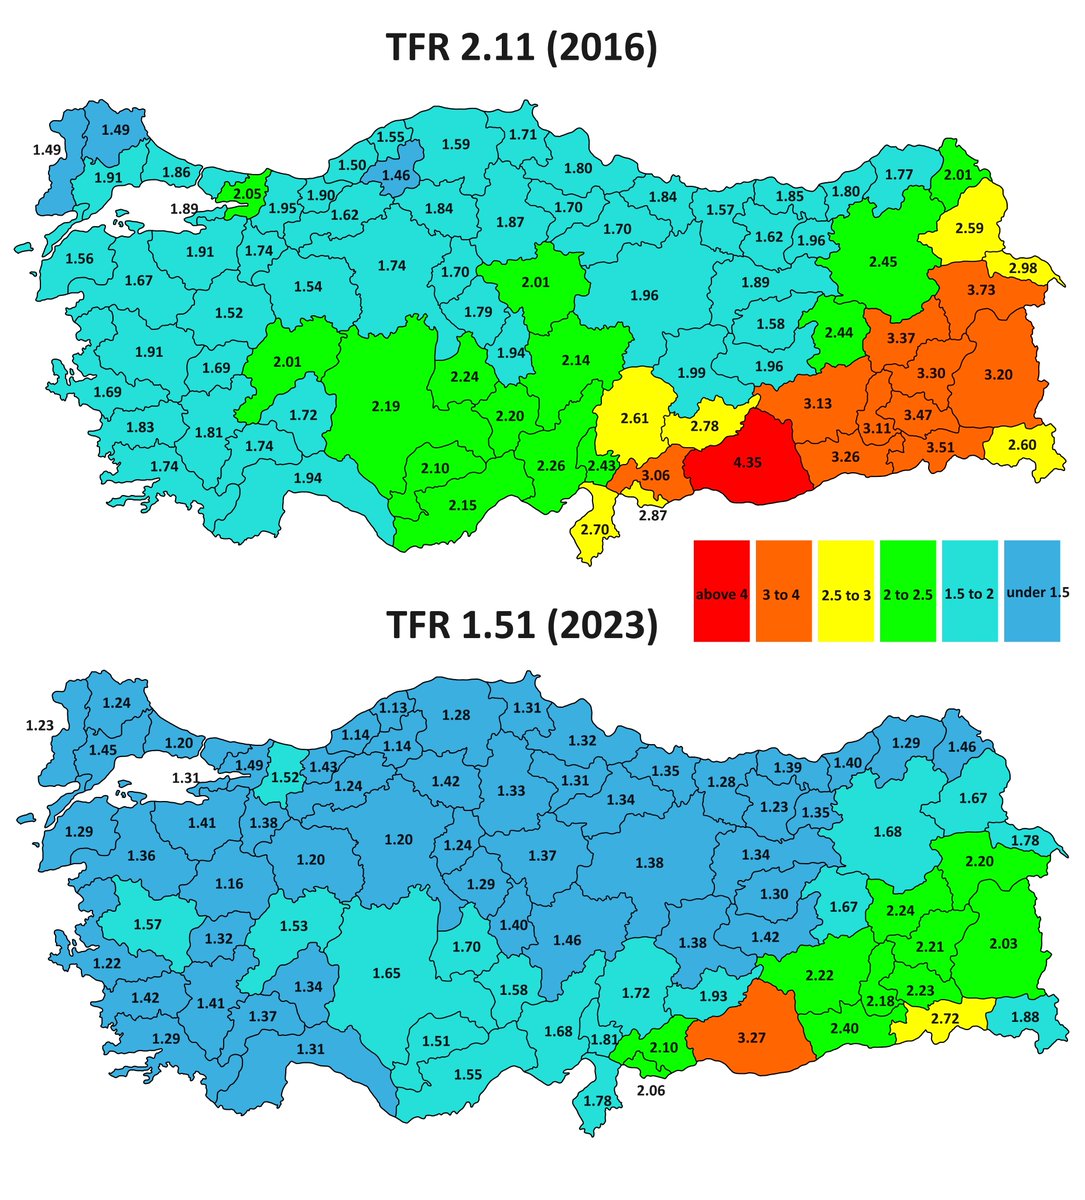 📌Turkey's collapsing population: Less than a decade, a quarter of the country's 81 provinces had above-replacement fertility rate. Considering the trend line, in 2025, the number will be down to only 3 out of 81 provinces (Urfa, Mardin, Sirnak), and then 0 in 2026-27